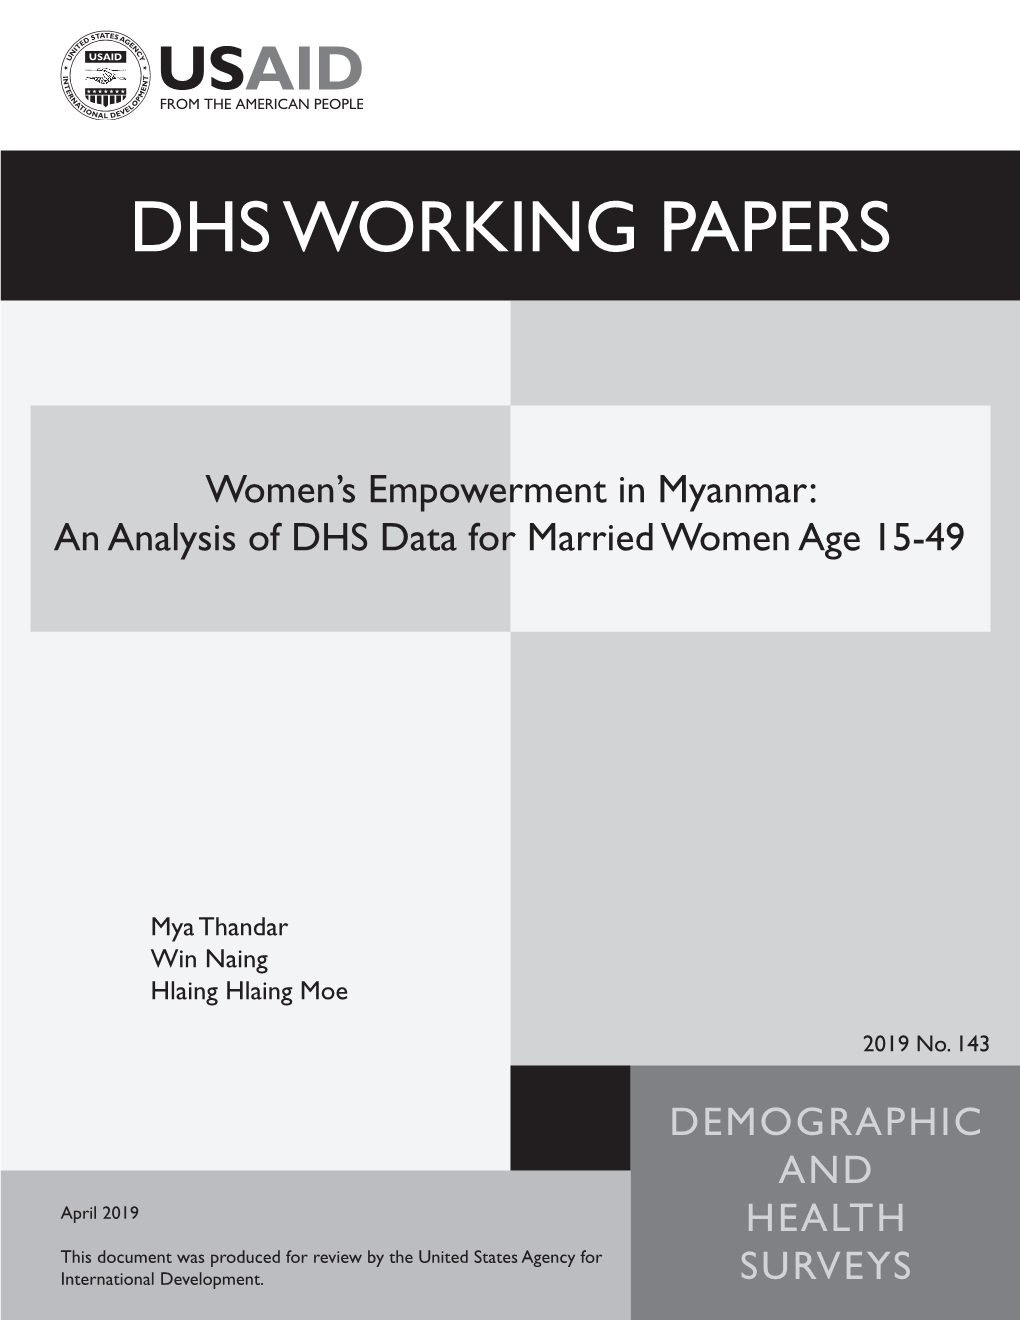 An Analysis of DHS Data for Married Women Age 15-49 [WP143]